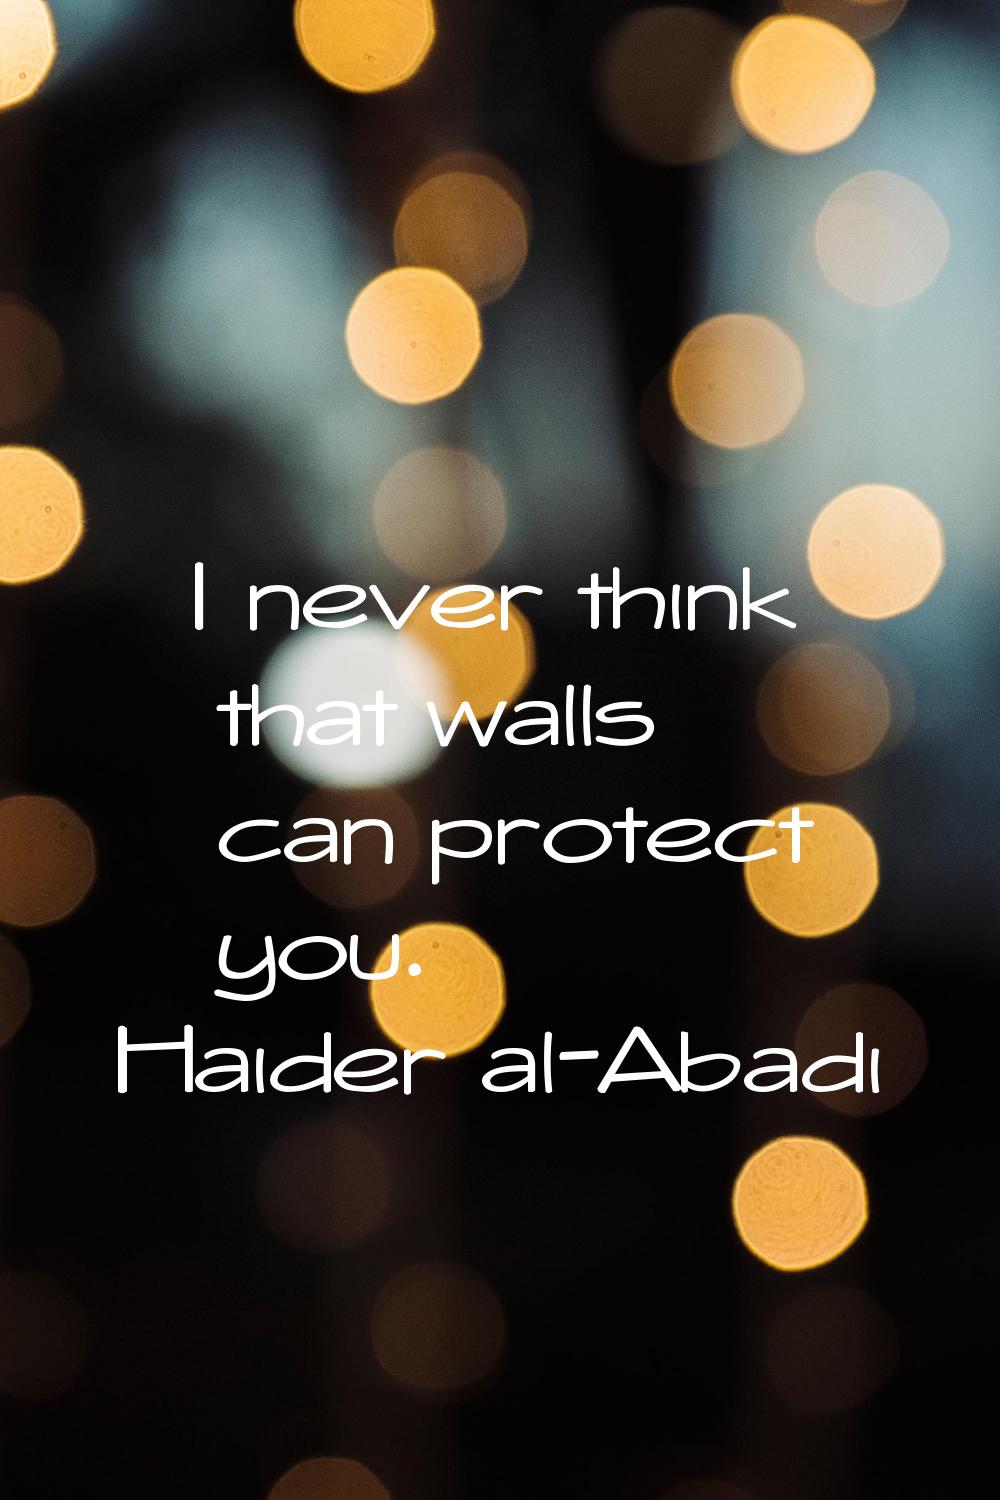 I never think that walls can protect you.